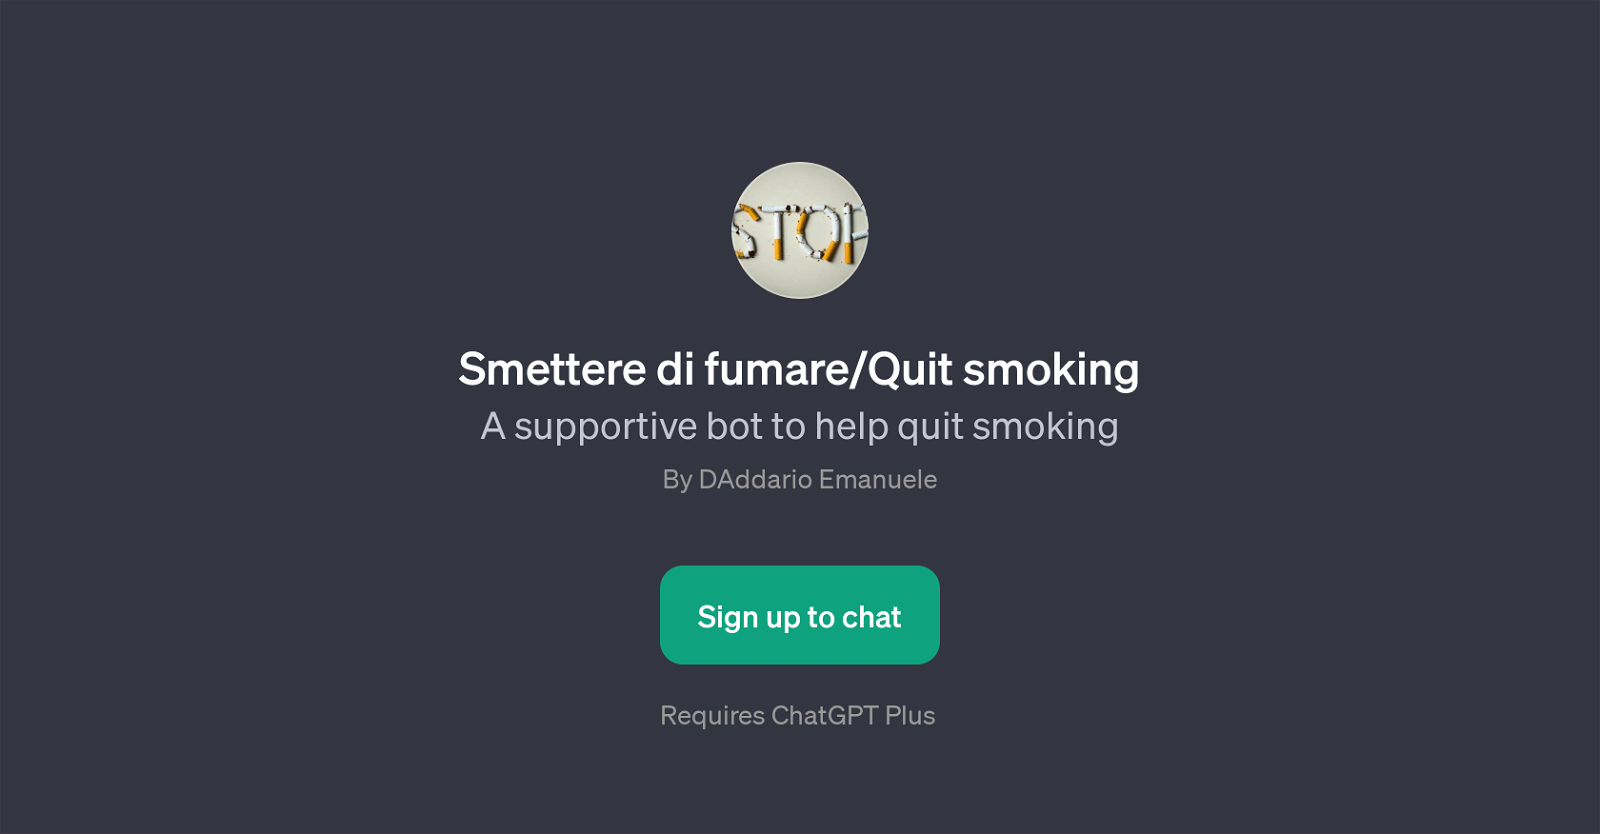 Smettere di fumare/Quit smoking website